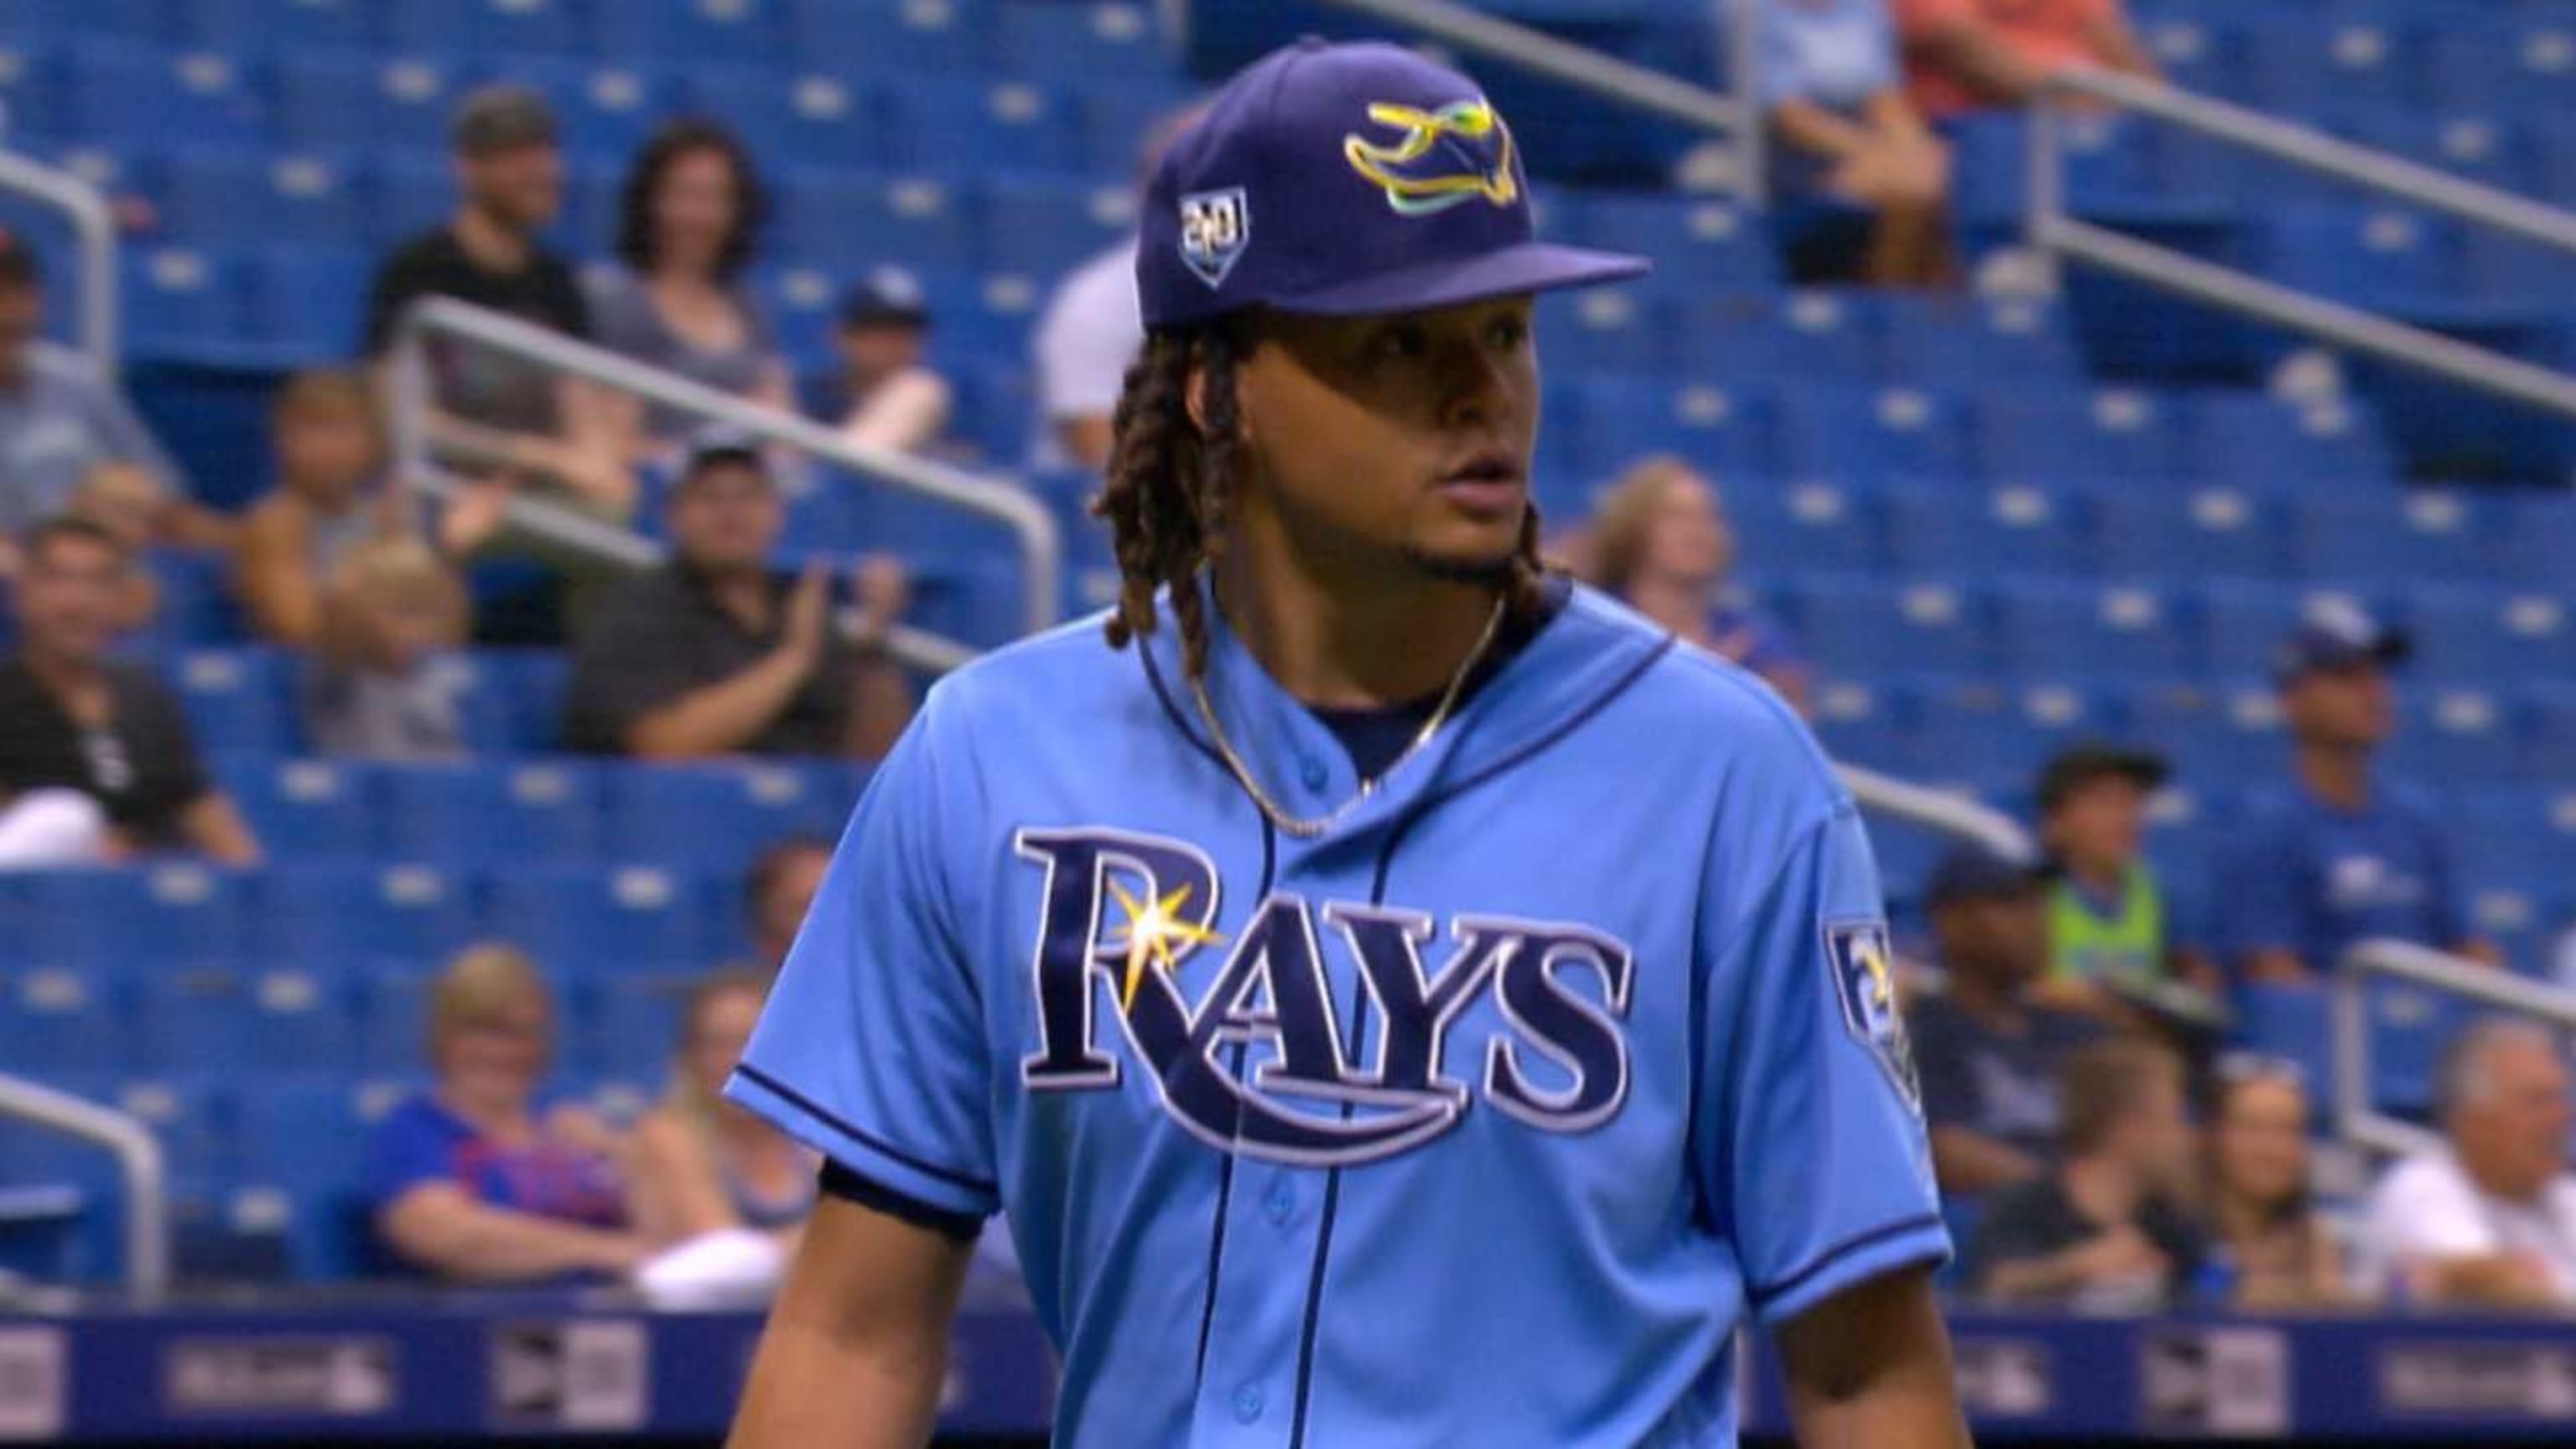 Chris Archer agrees to rejoin Tampa Bay Rays on 1-year deal